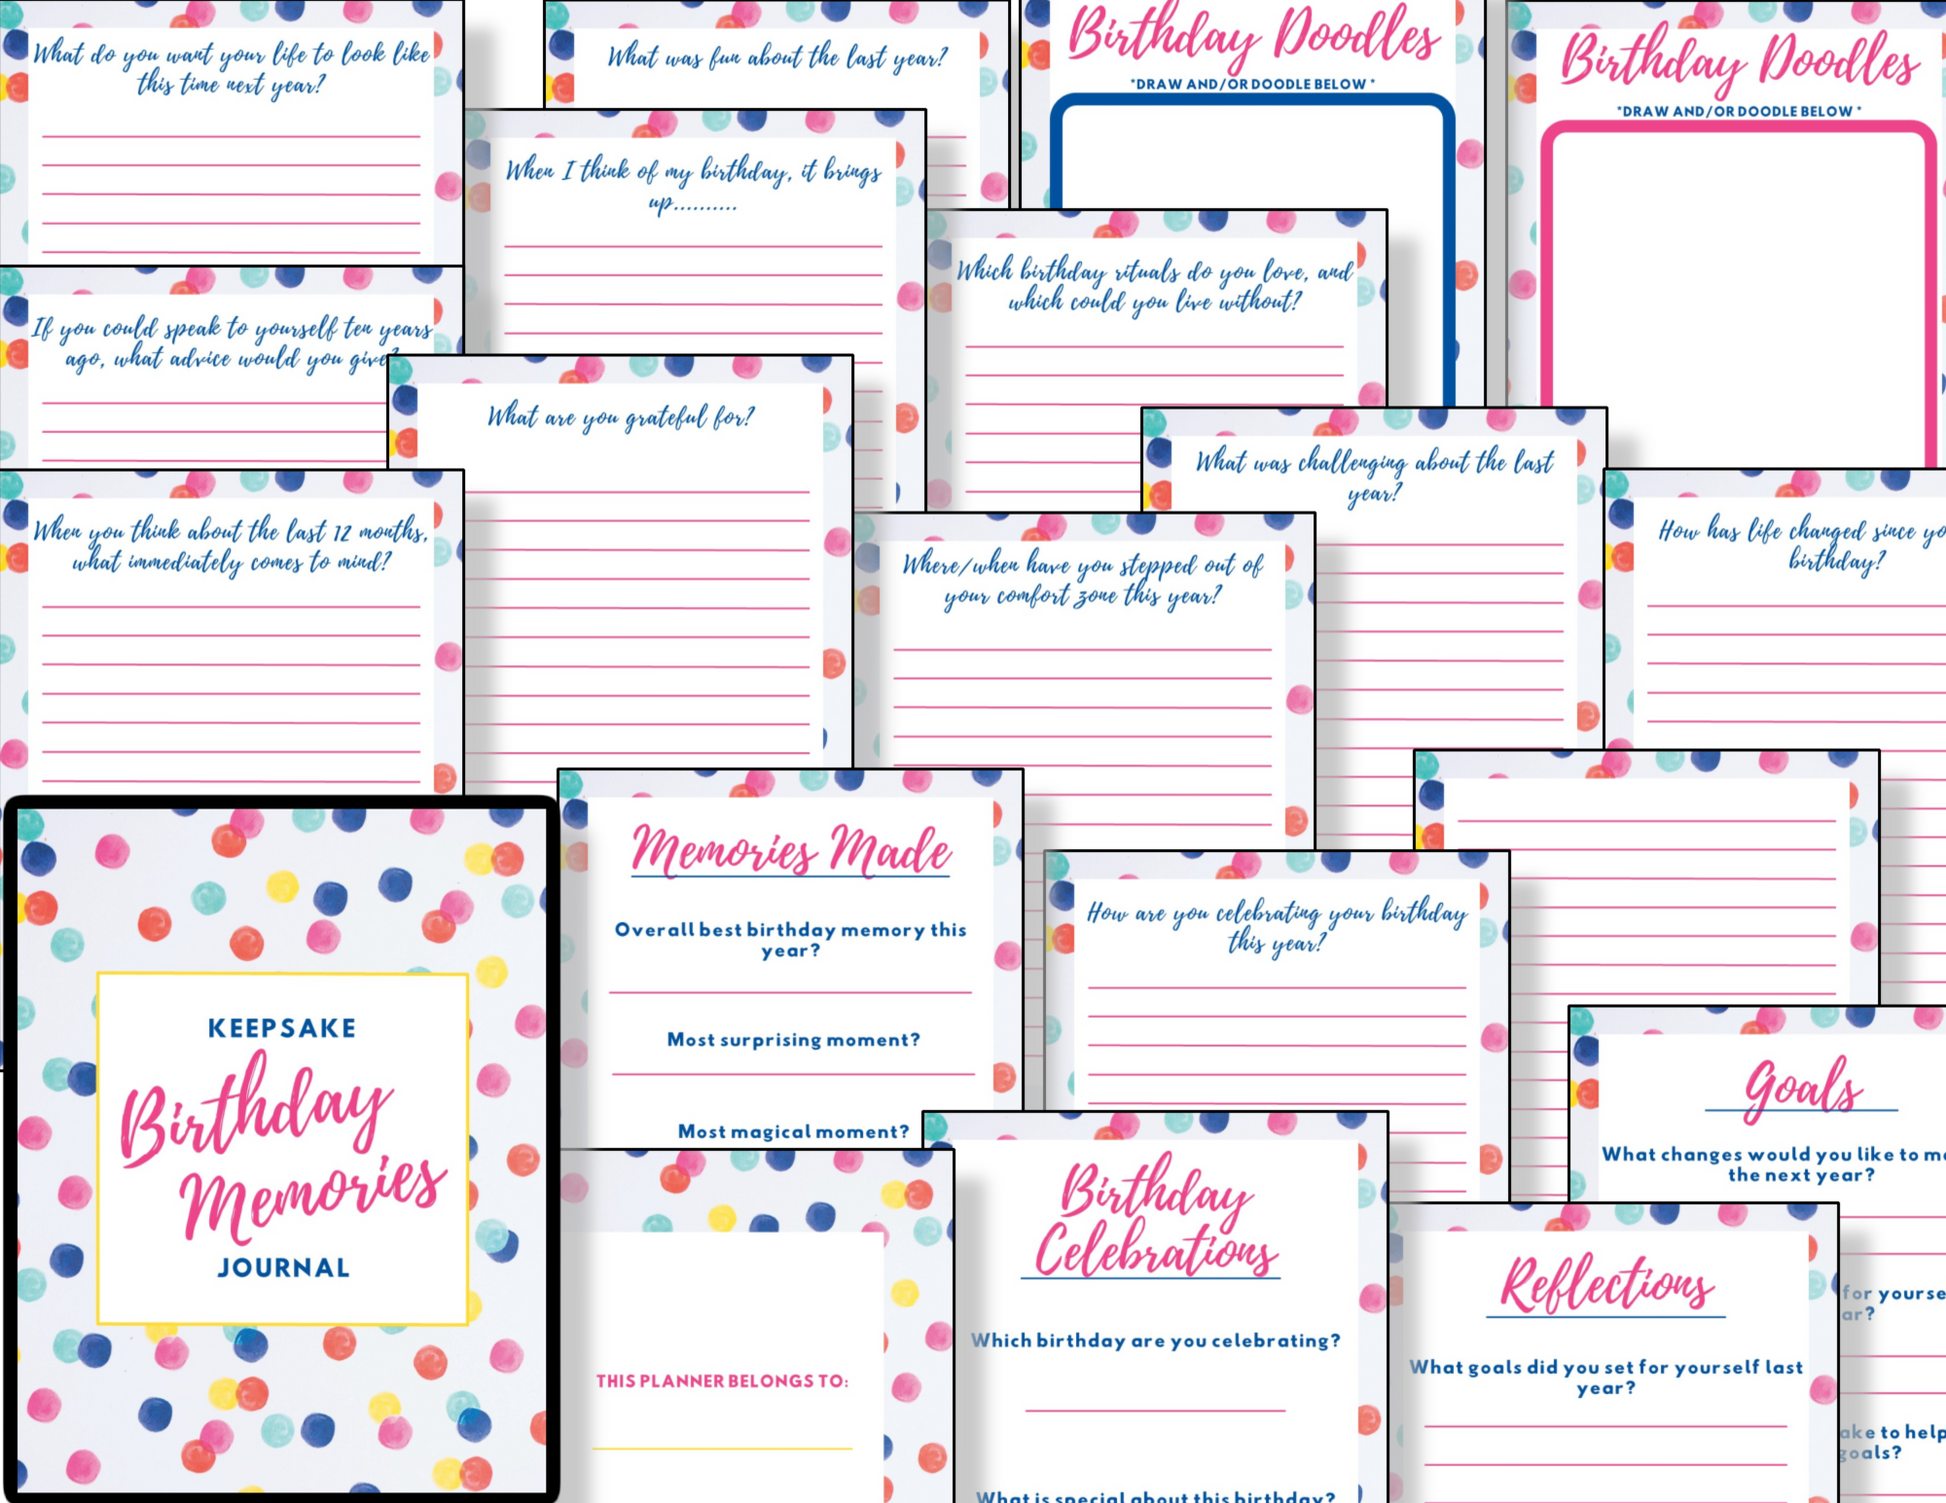 A set of Birthday Memories Keepsake Journals with colorful polka dots from the Organized 31 Shop.